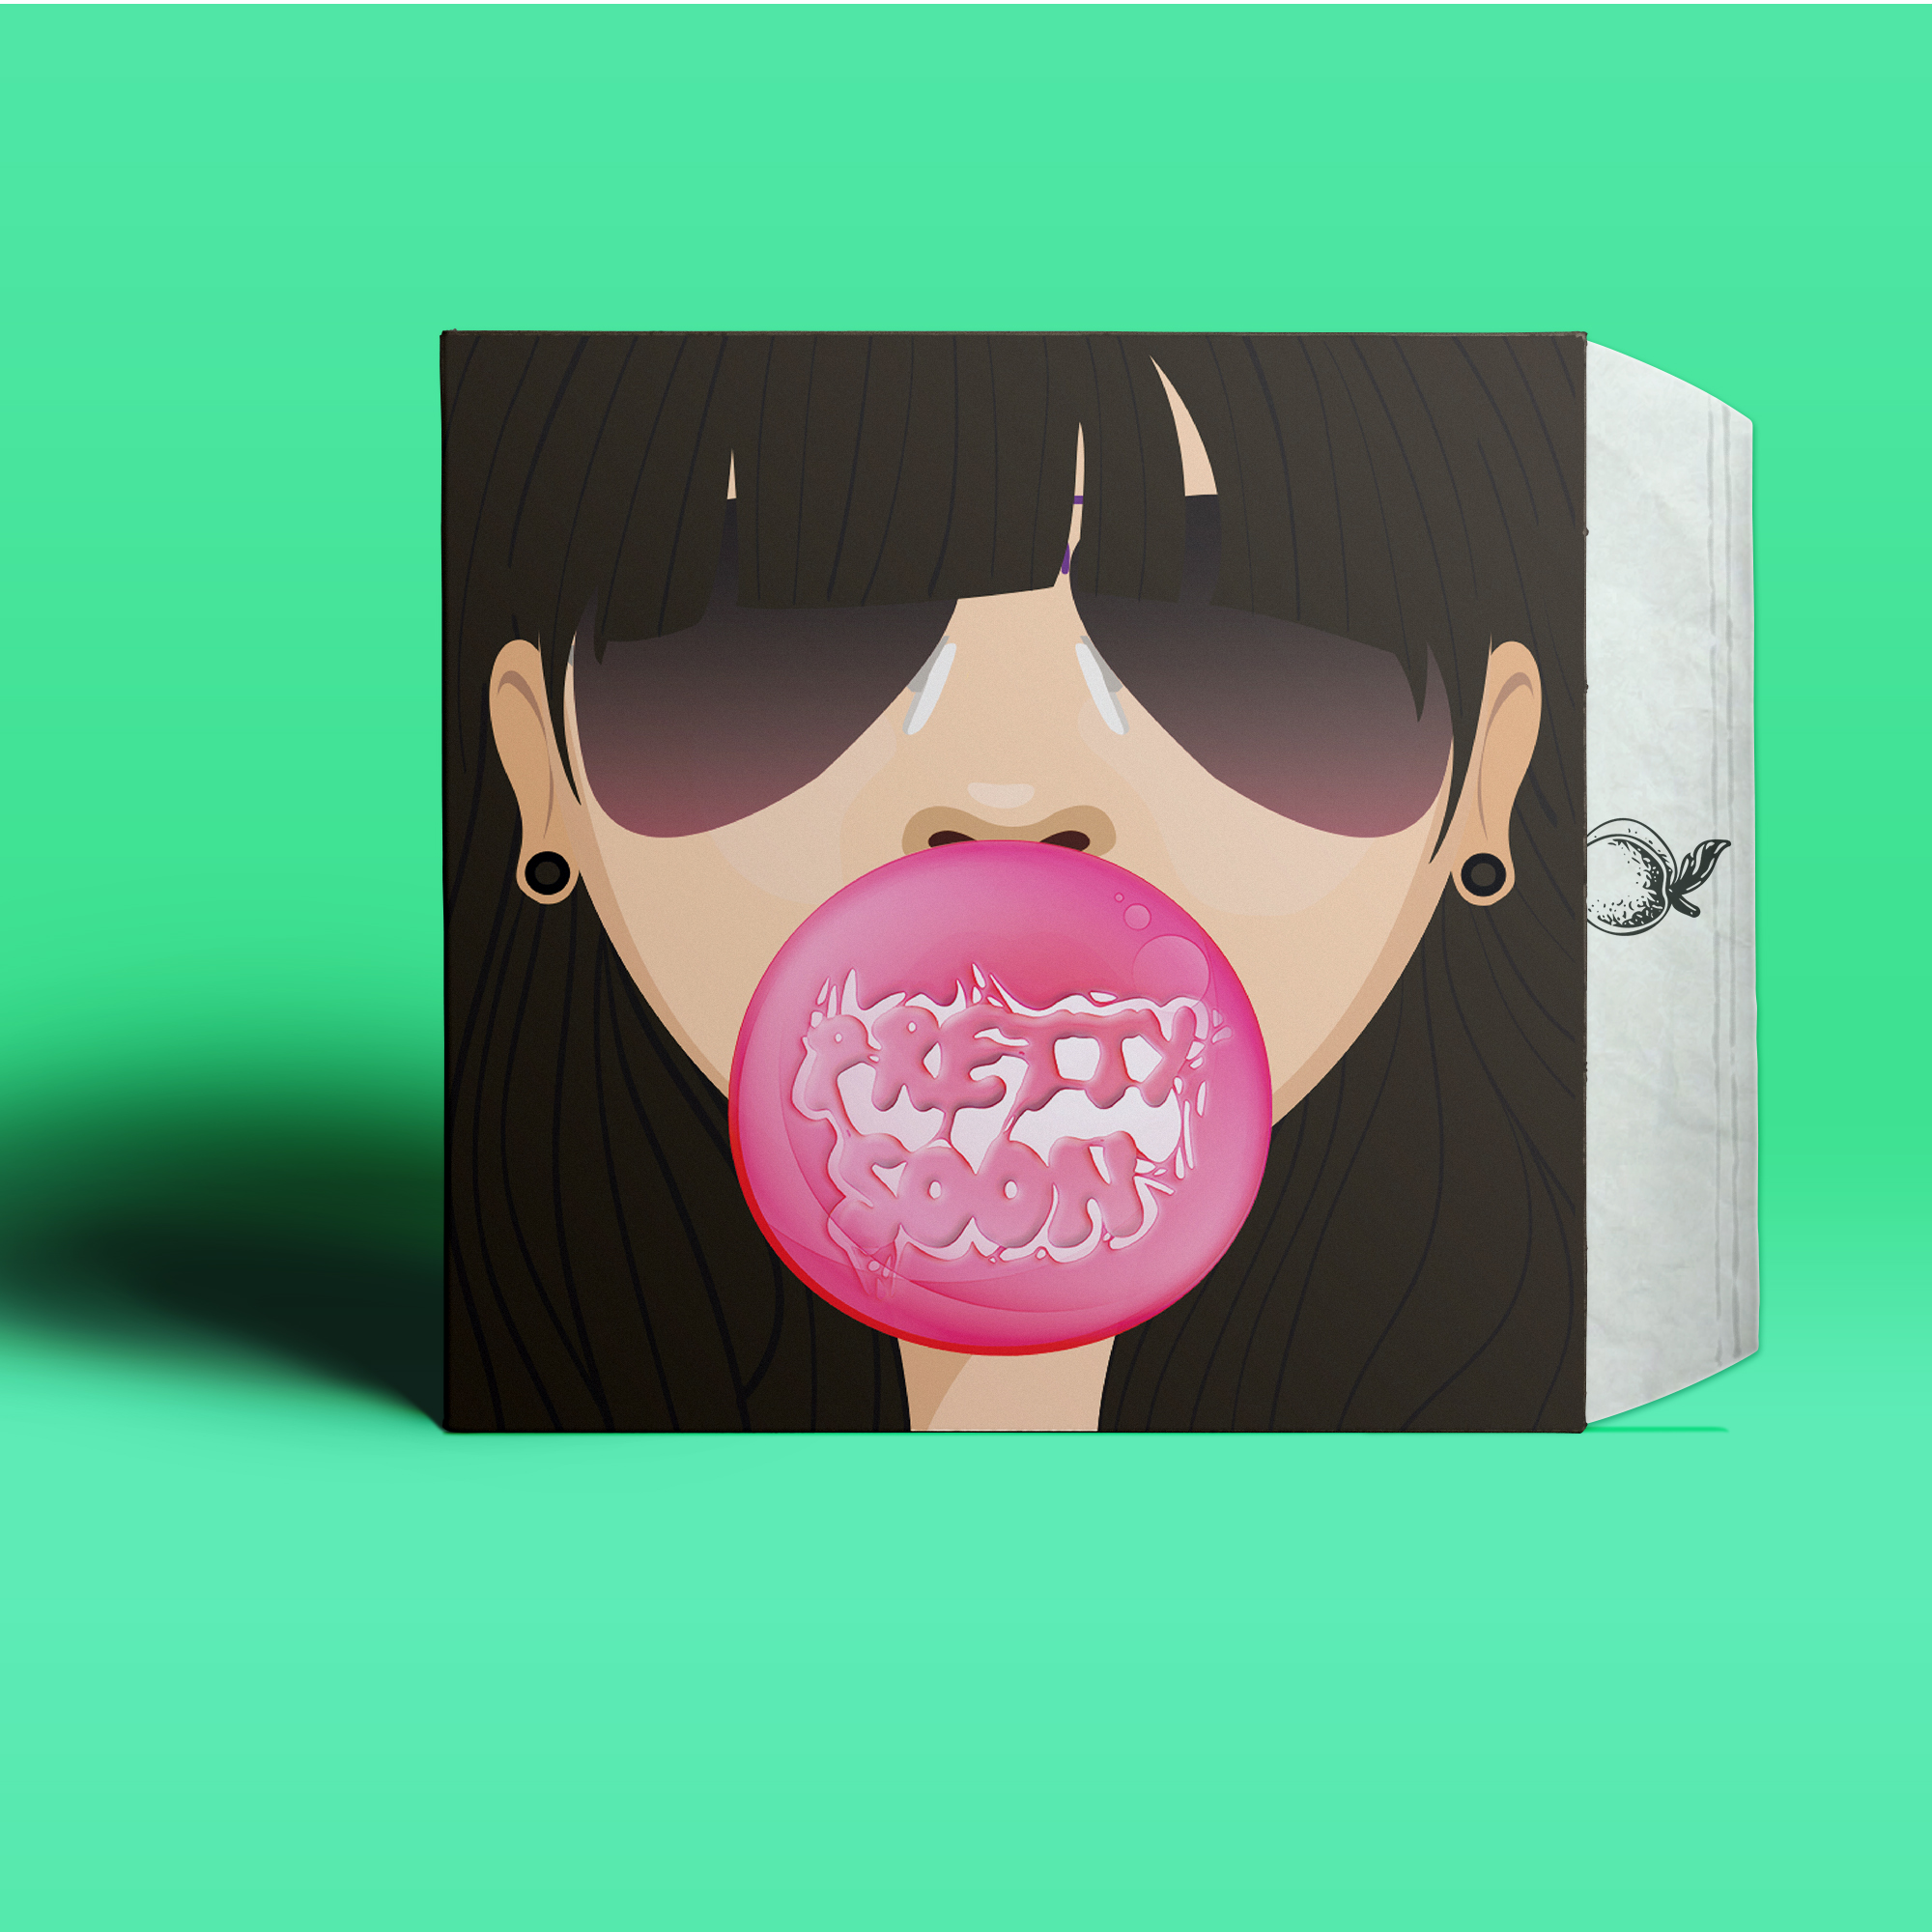 Vinyl-Record-and-Cover-Presentation-Mock-up4.jpg